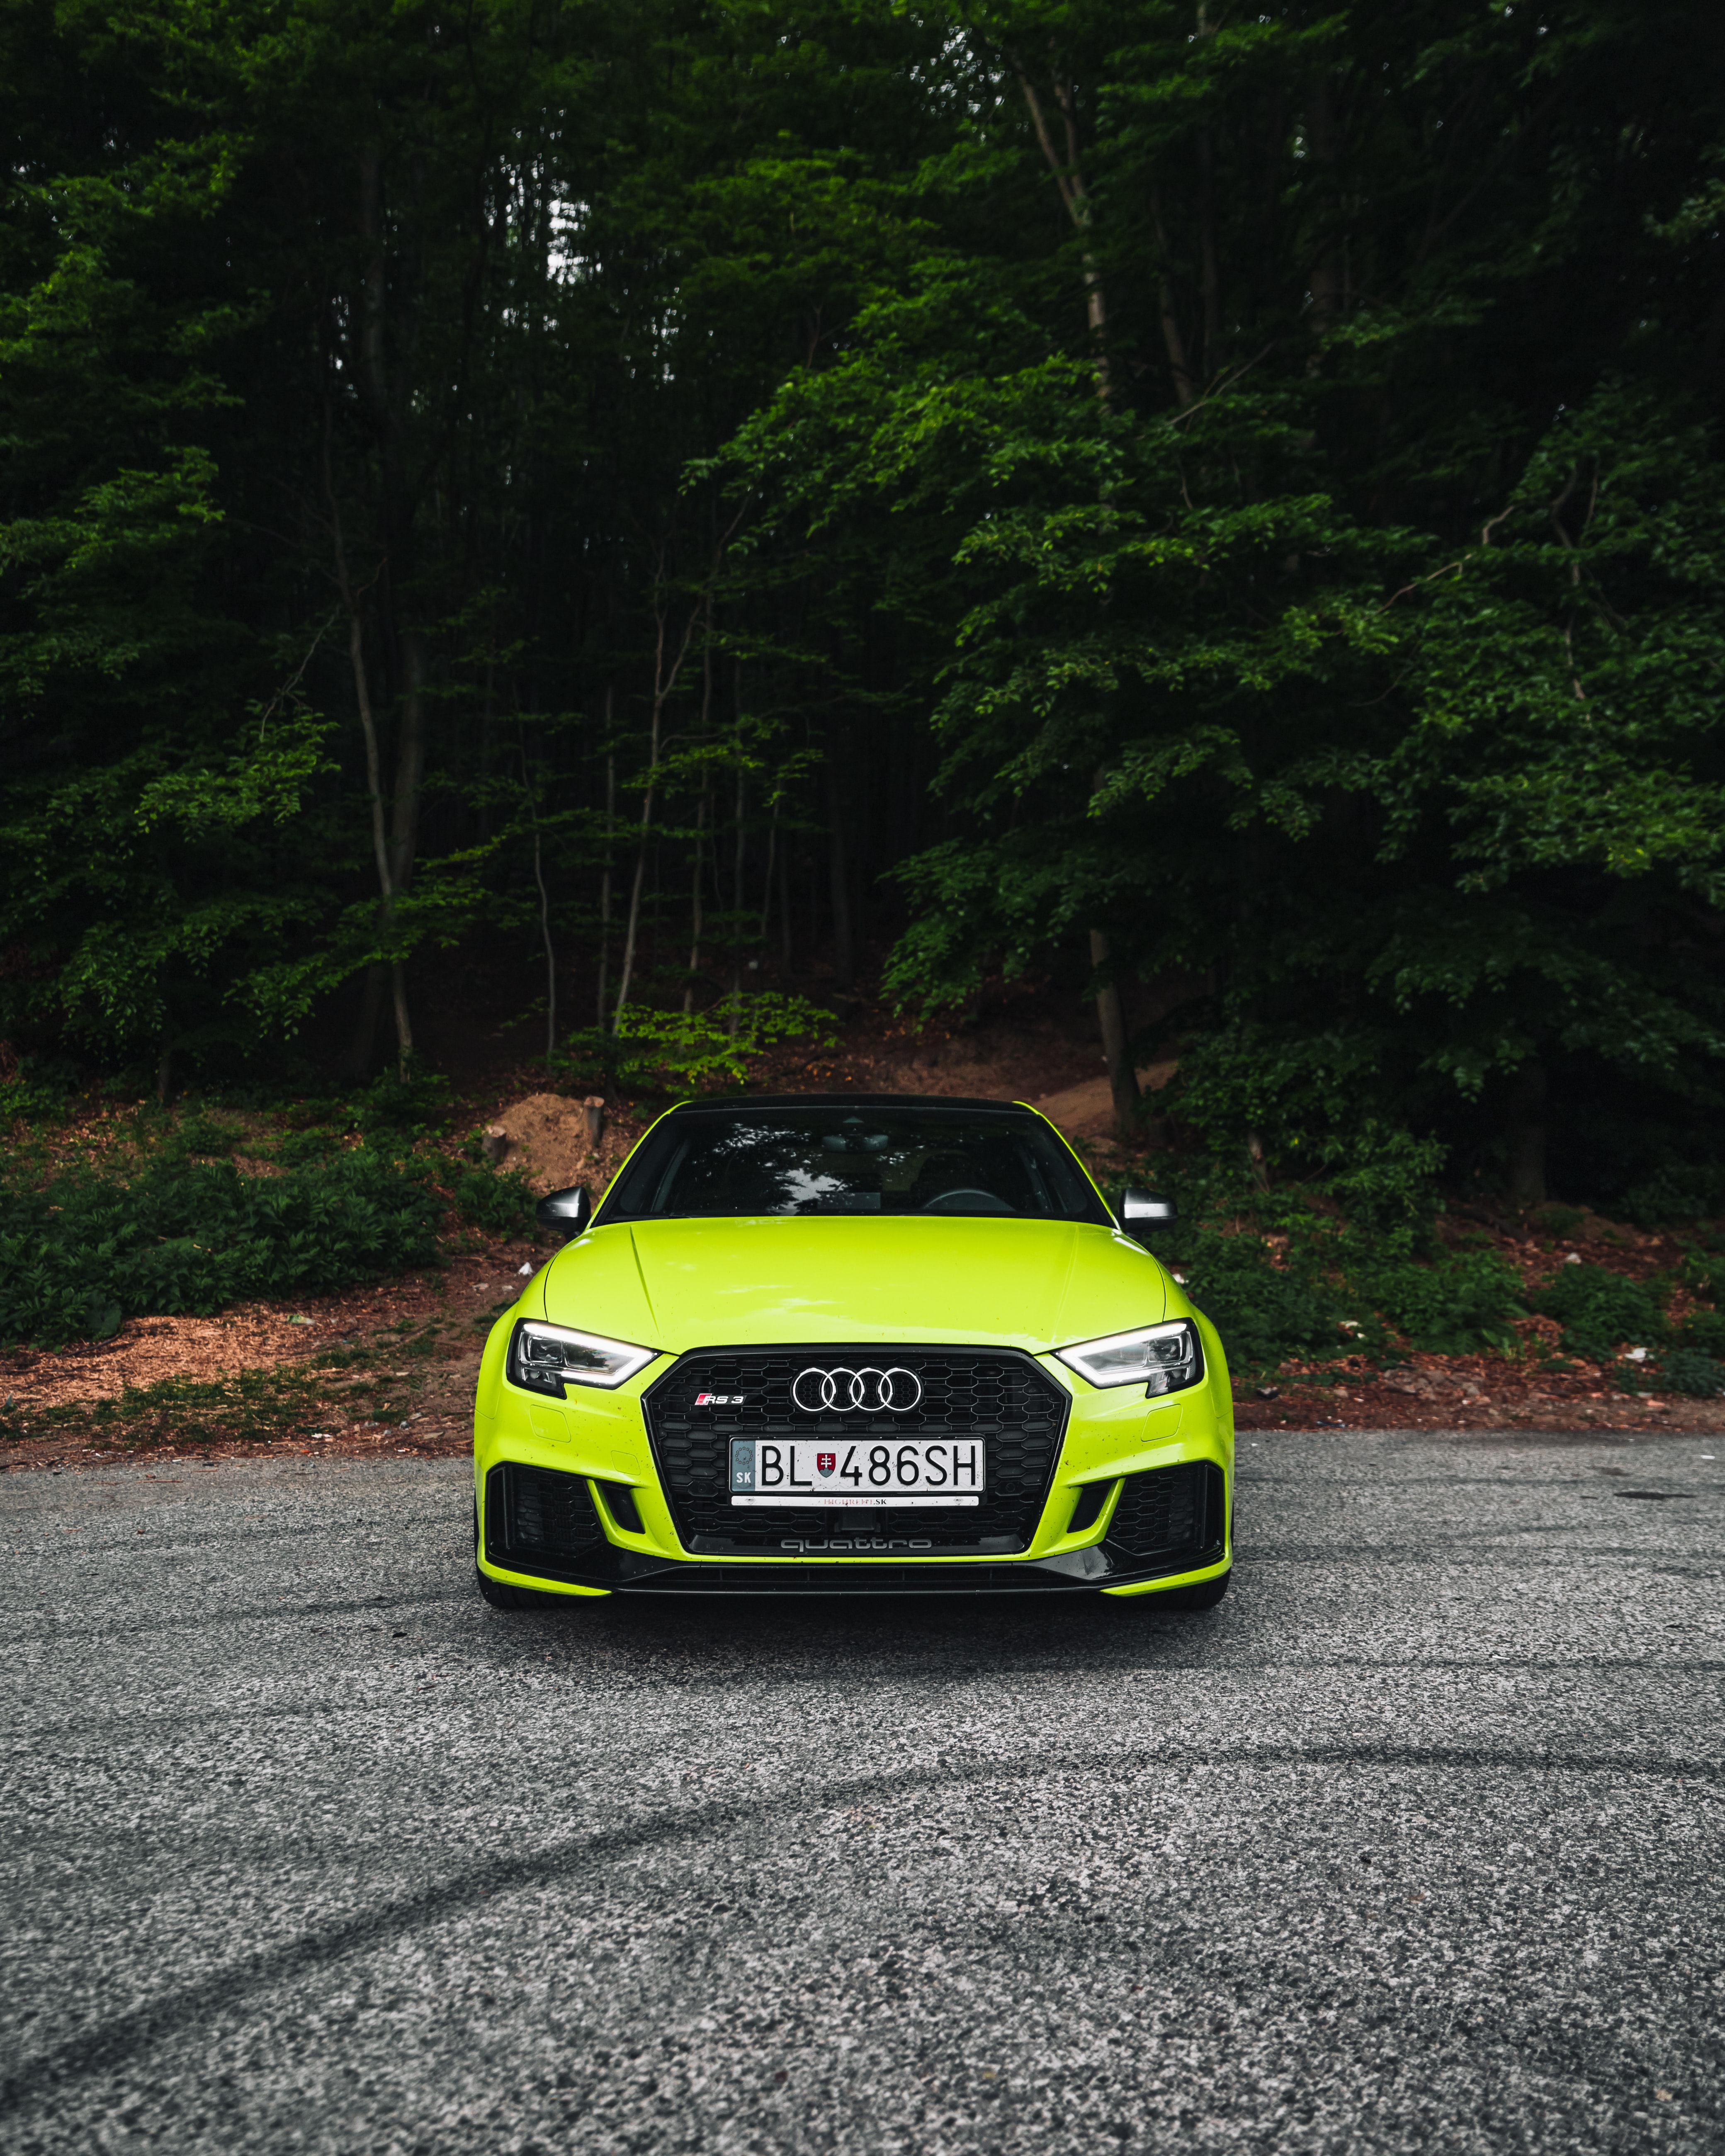 cars, front view, audi, sports car, sports, green, car, audi rs4